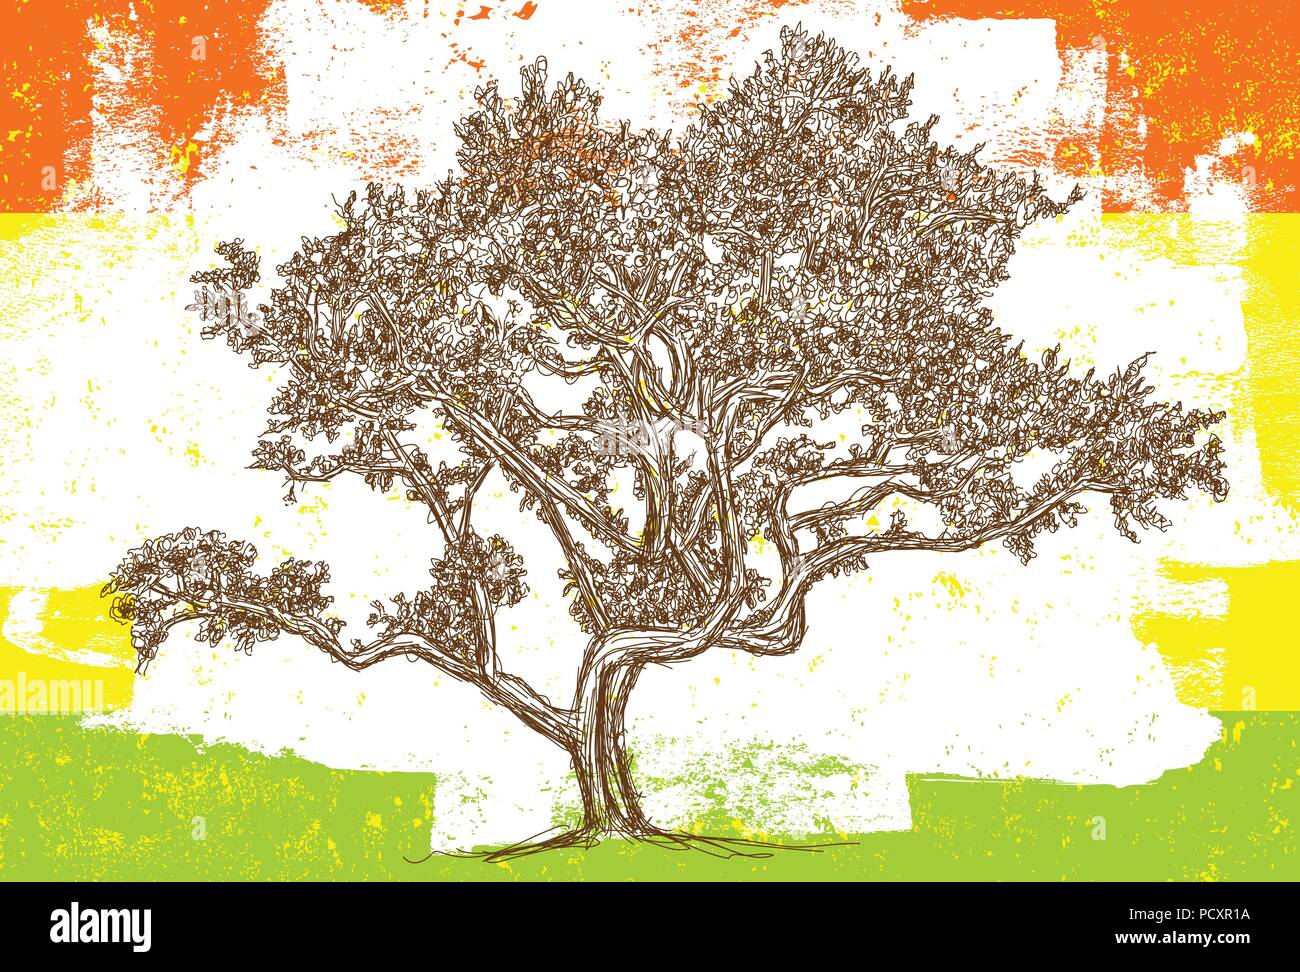 Sketchy Oak tree A sketchy oak tree over a distressed background. Stock Vector